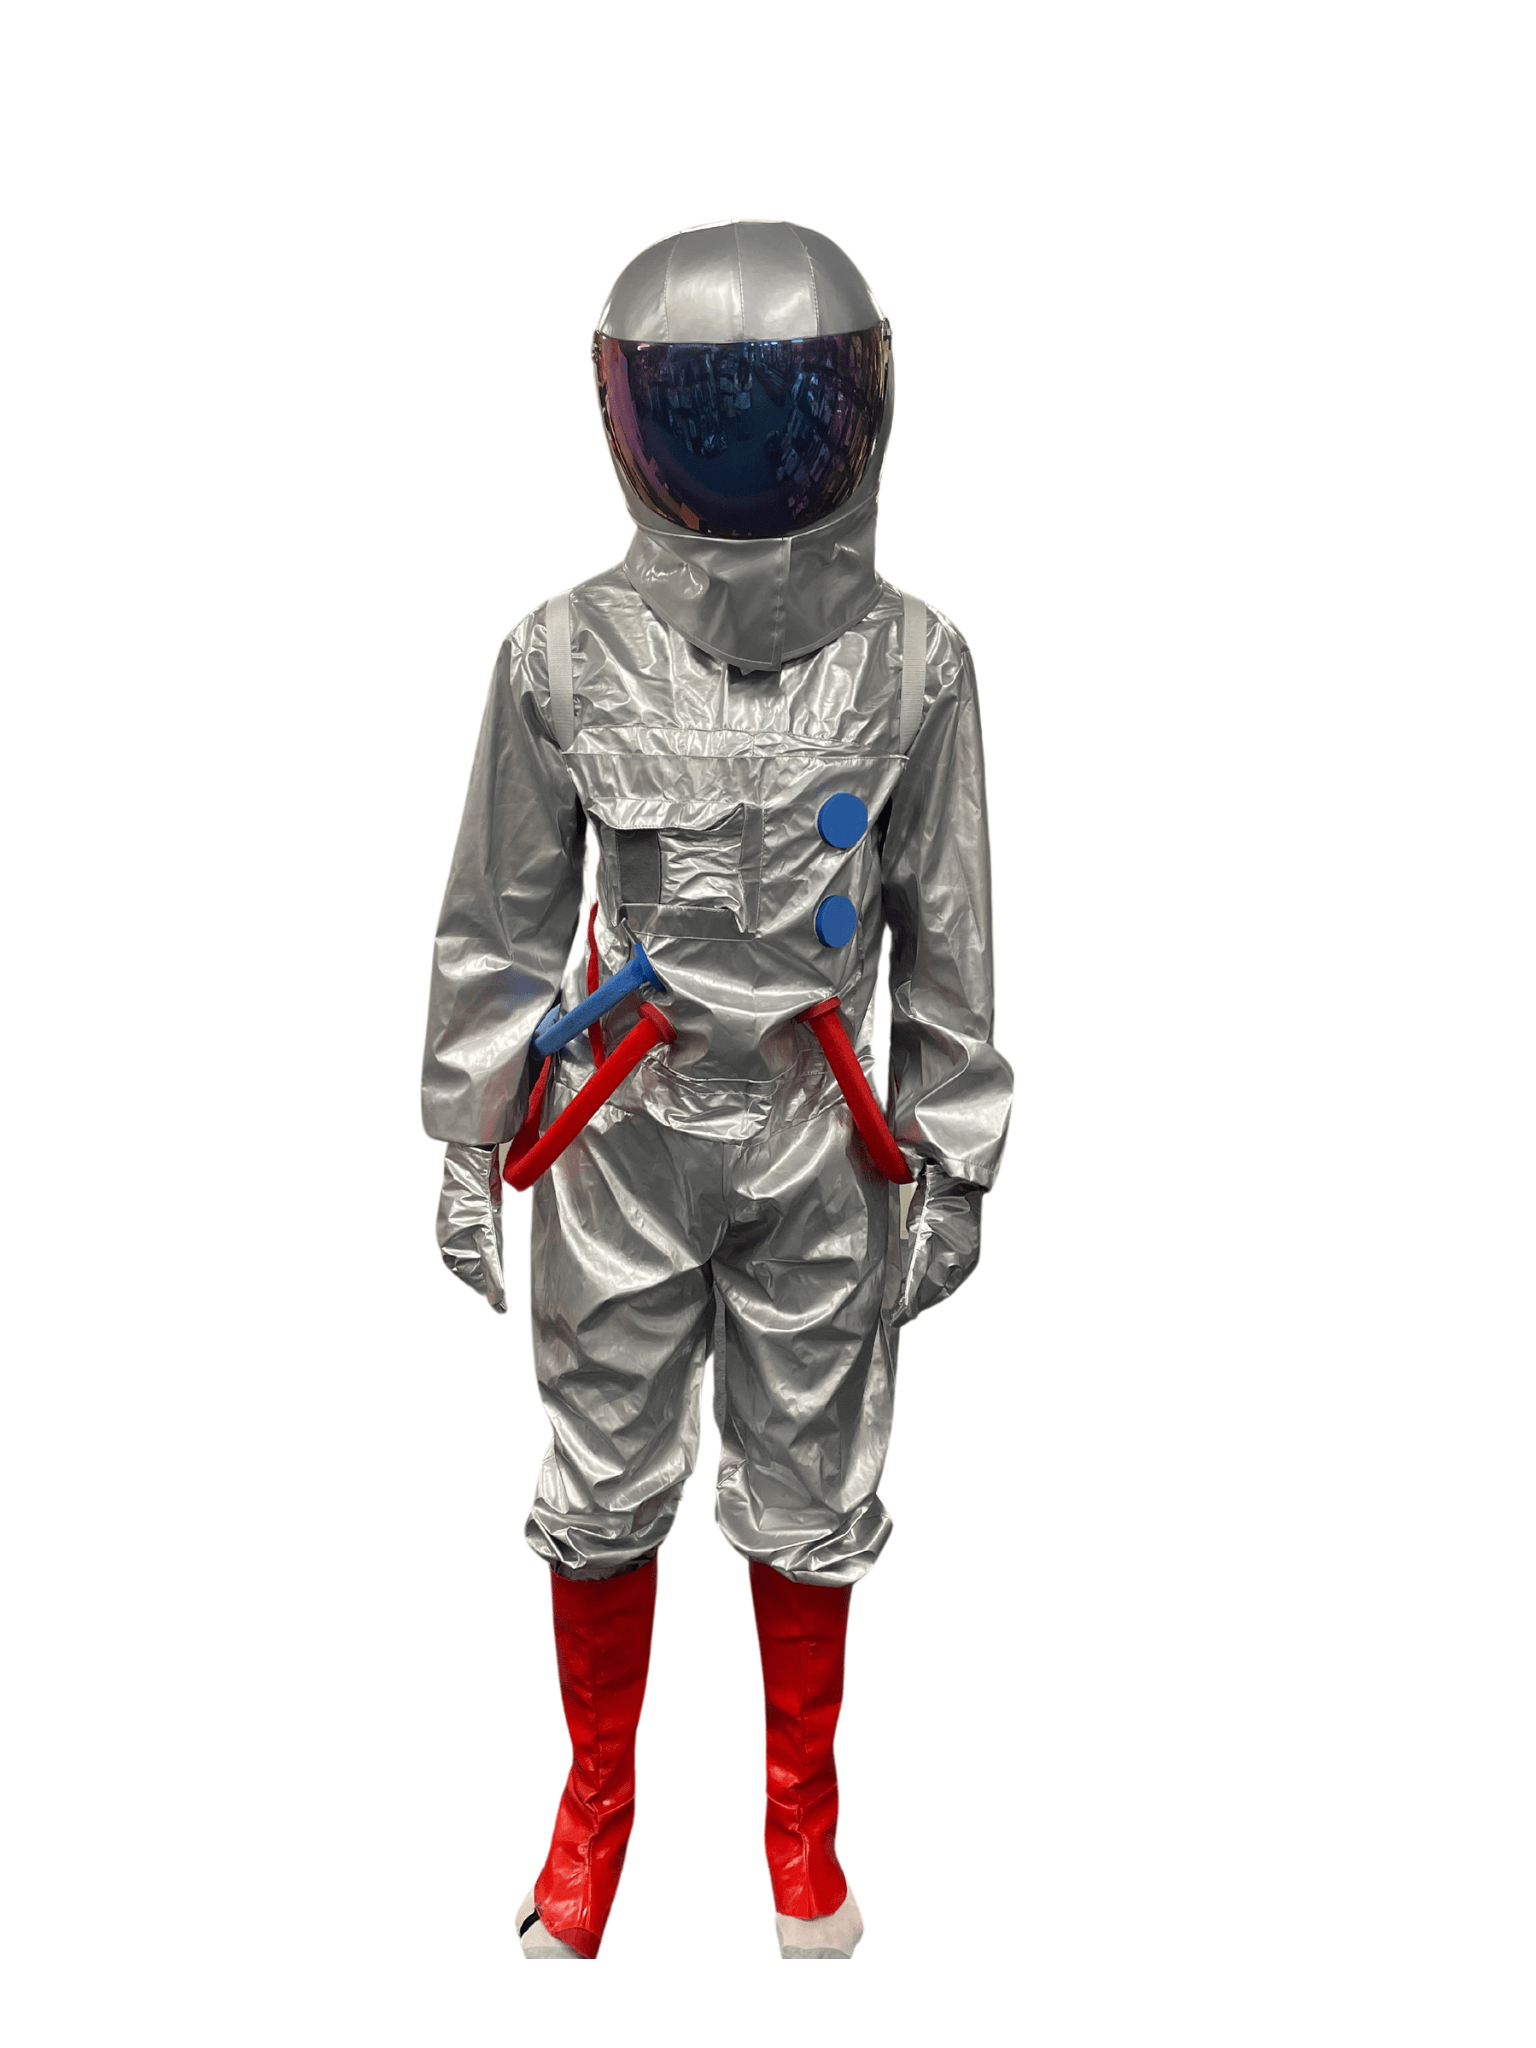 Featured image for “Astronaut Spaceman”